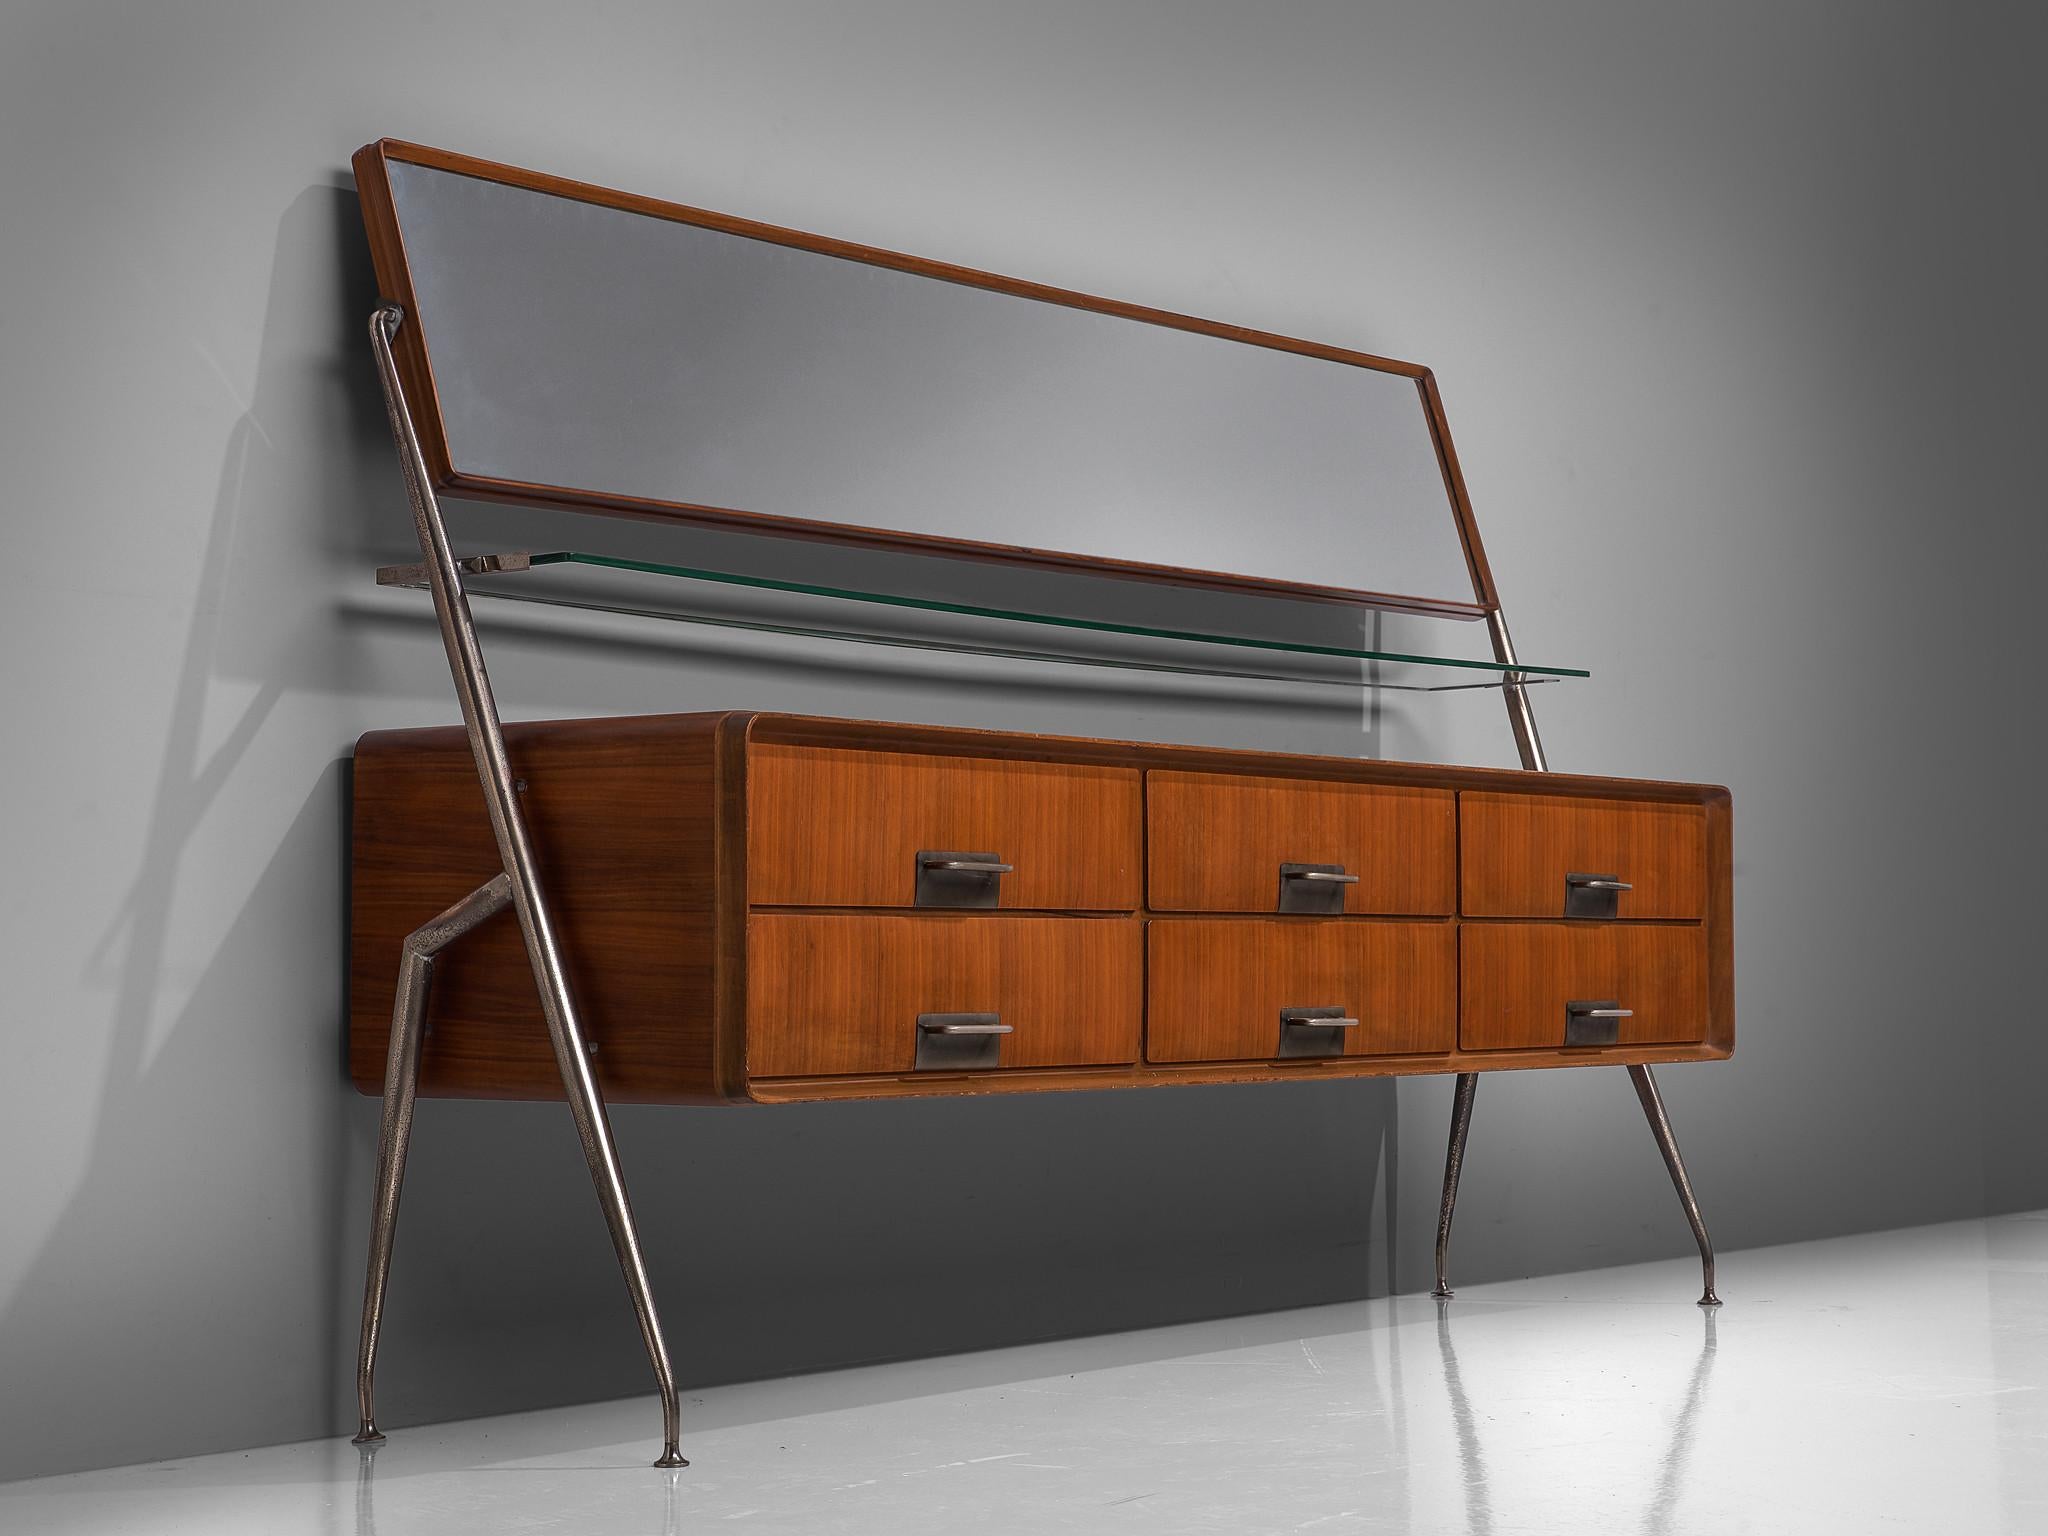 Silvio Cavatorta, sideboard with mirror, metal, mahogany veneer, glass, Italy, design 1958.

Elegant Italian sideboard designed by Silvio Cavatorta in 1958. This large cabinet is equipped with six drawers, a glass shelf and a large mirror. The piece